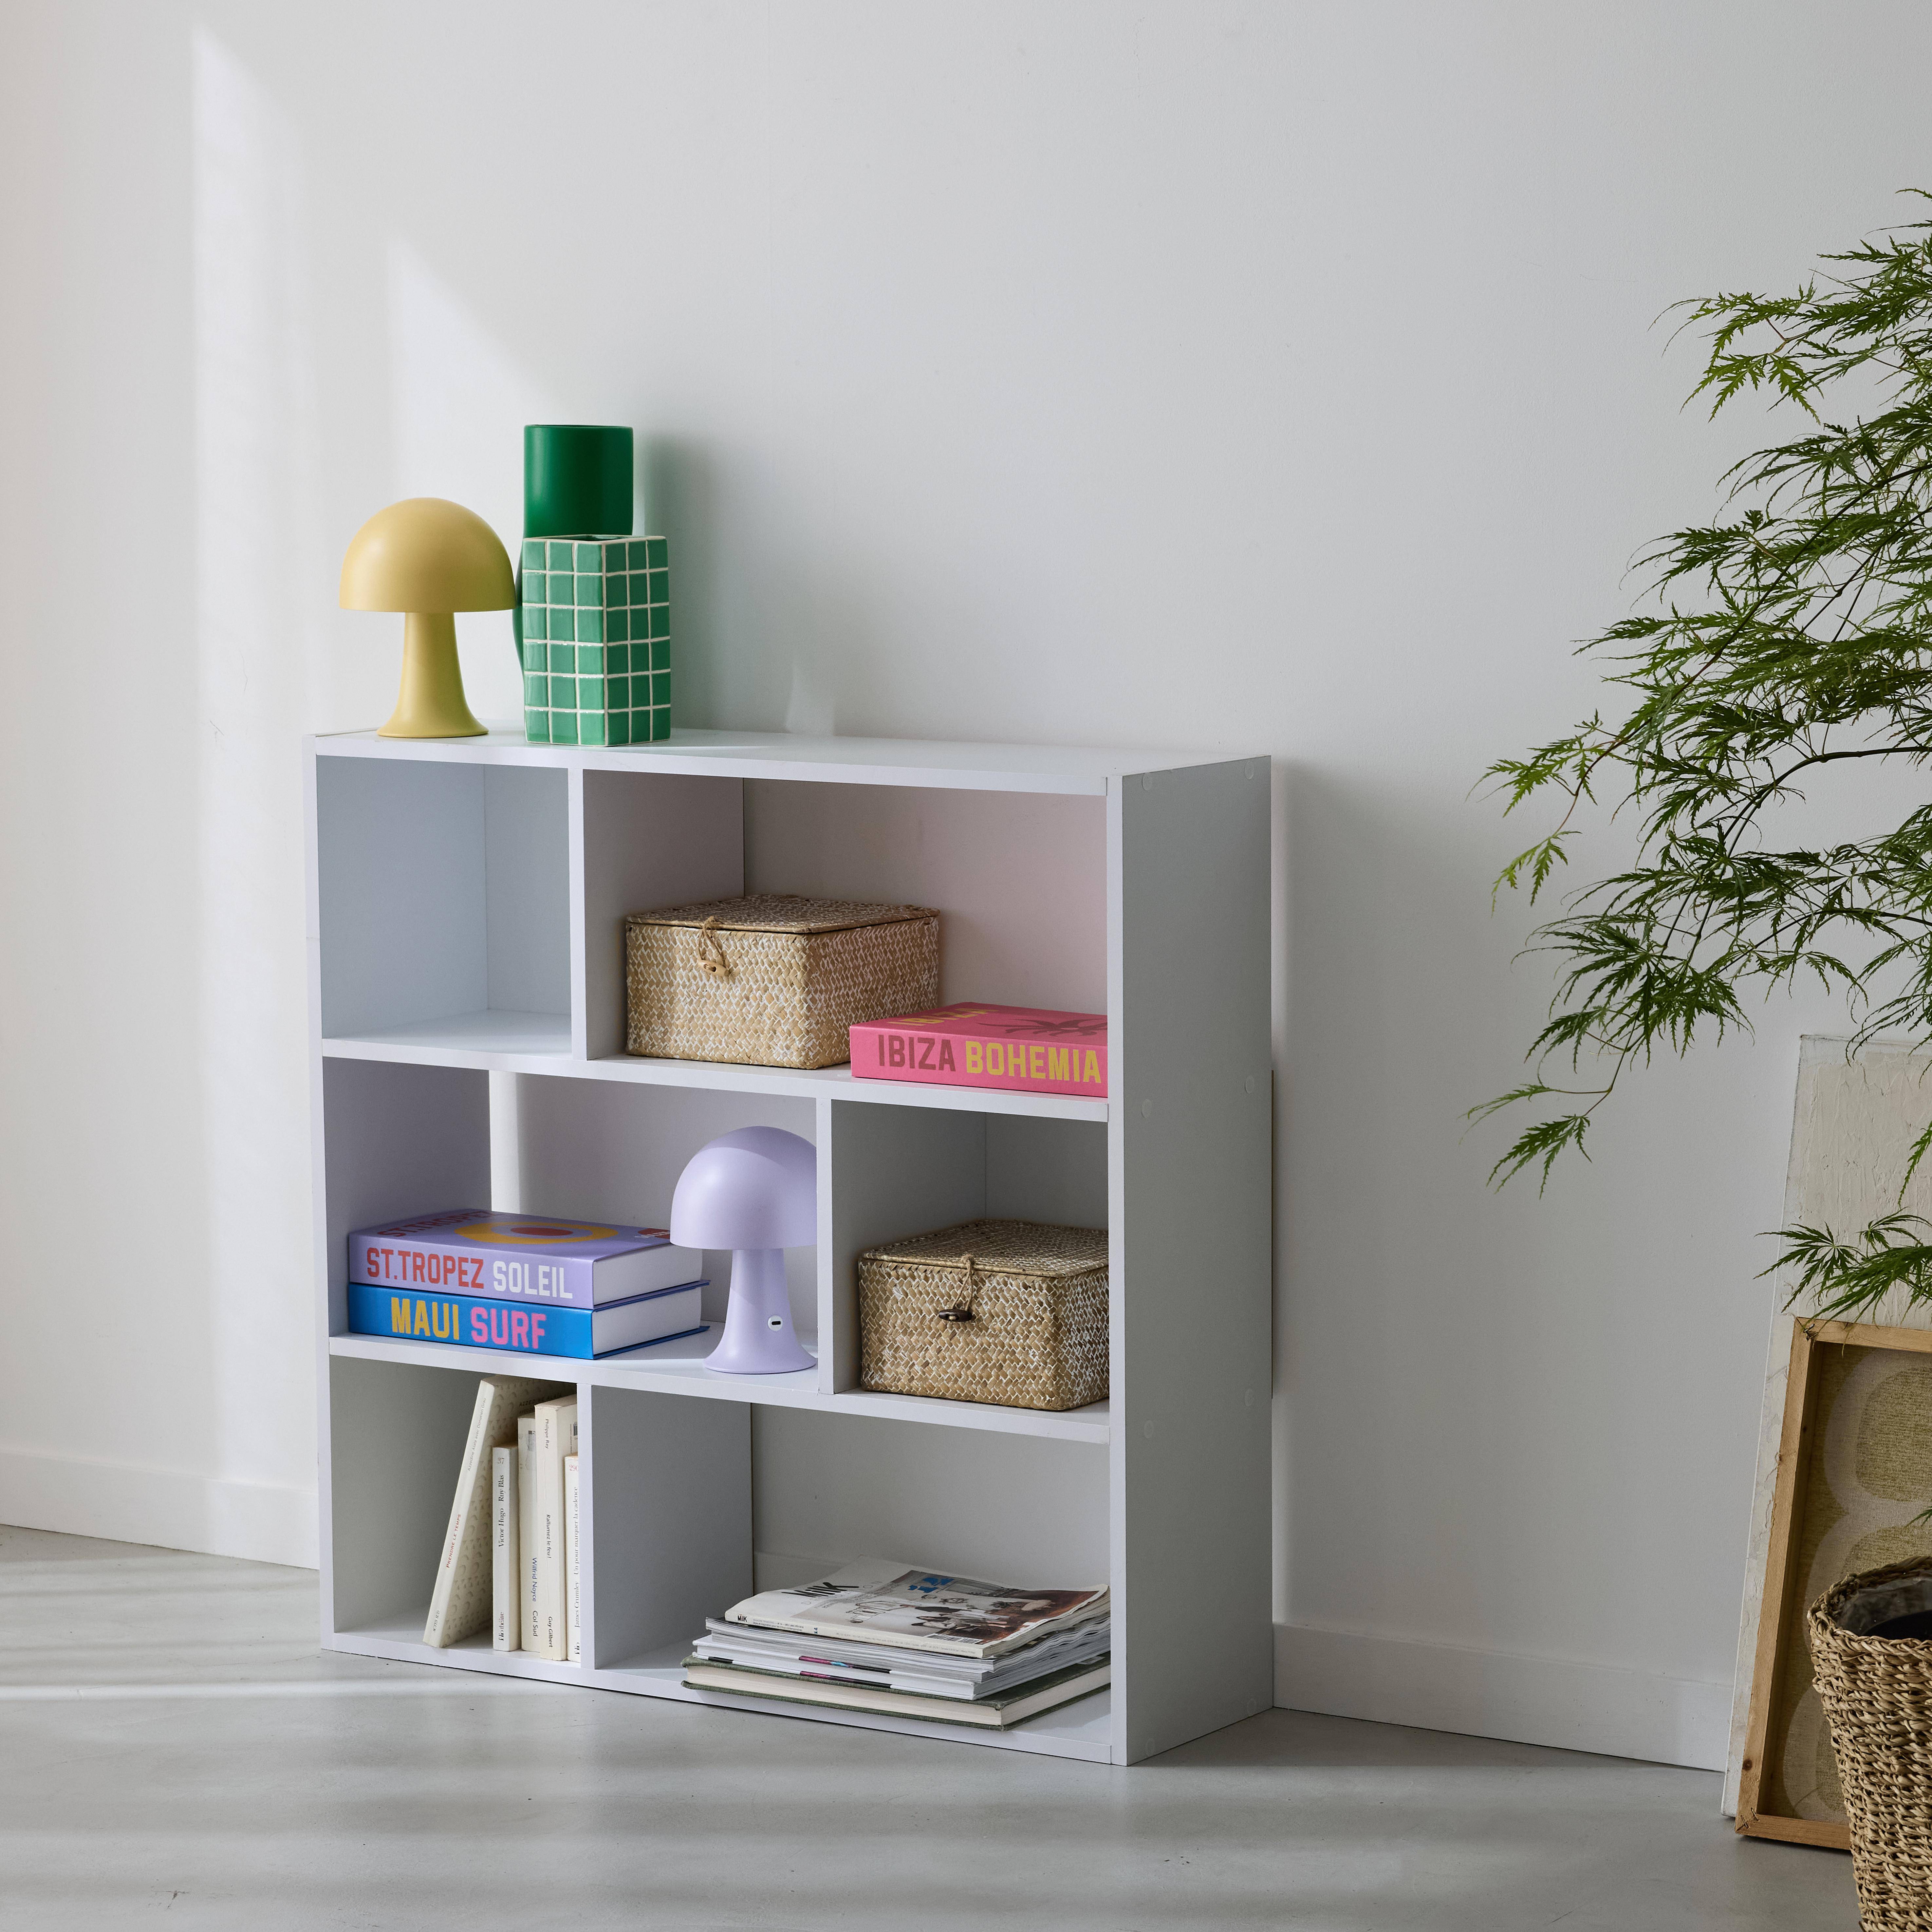 3-shelf bookcase with 6 compartments, white, L83xW23xH80cm, Pieter,sweeek,Photo2